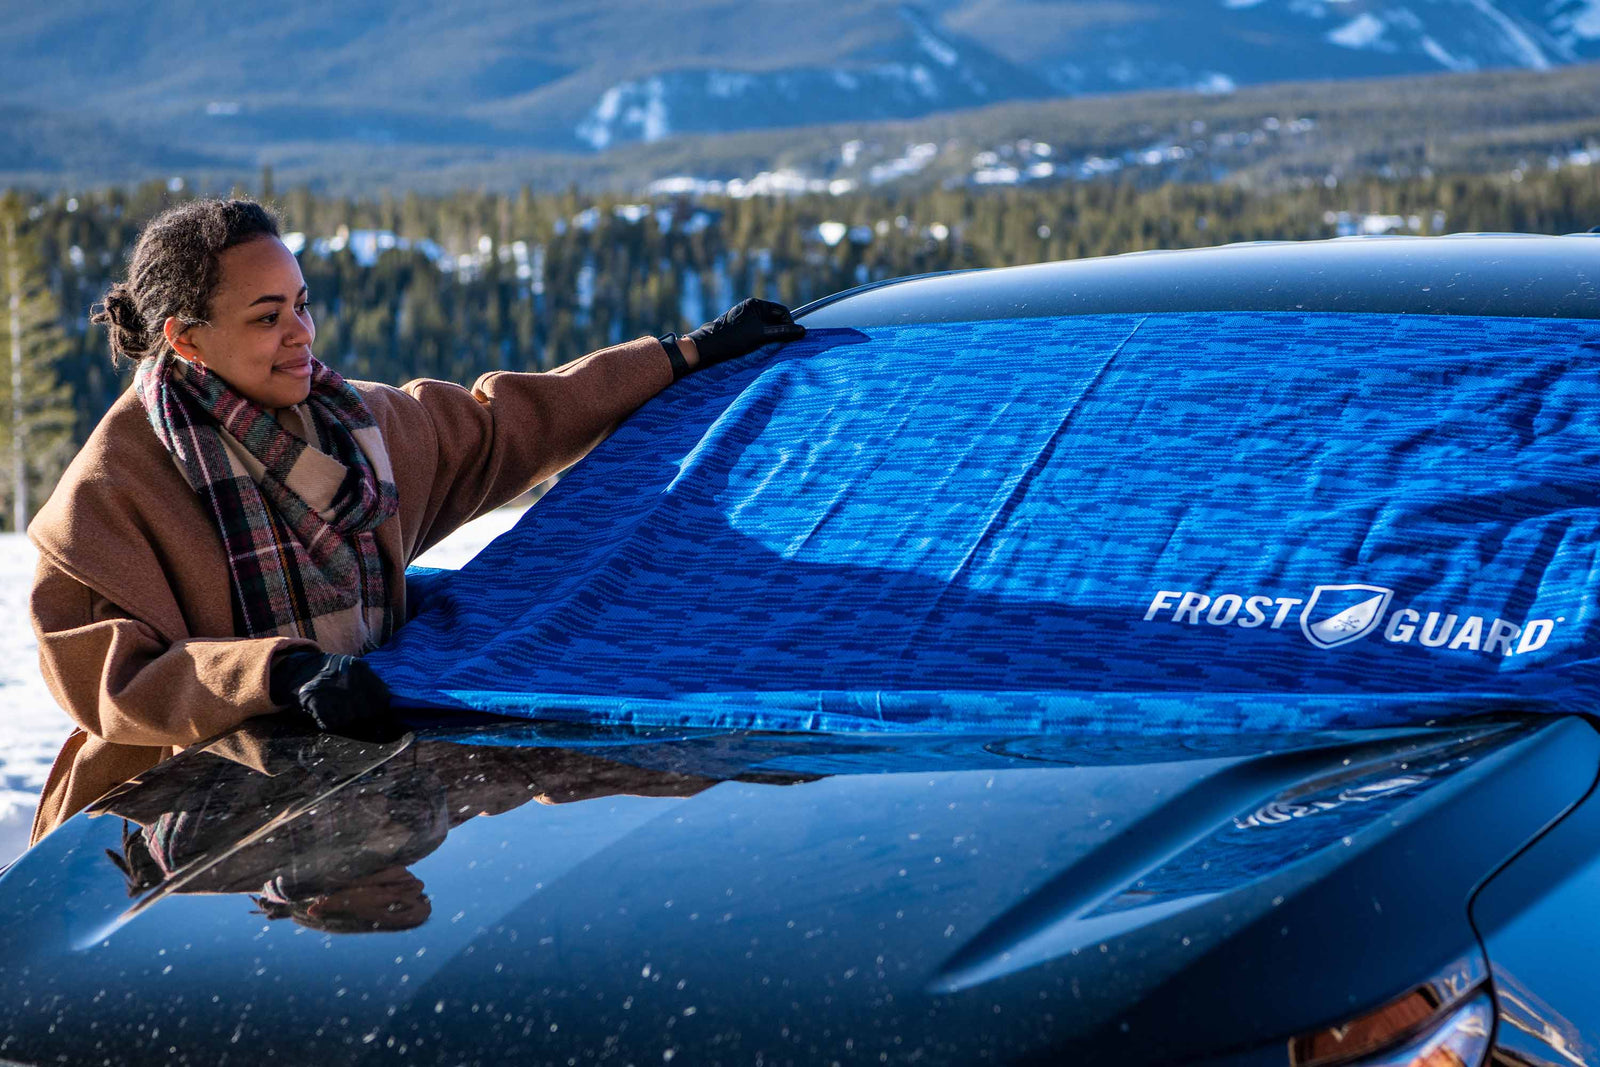 FrostGuard® Windshield Cover is the Key to this Winter - Urban Transit™